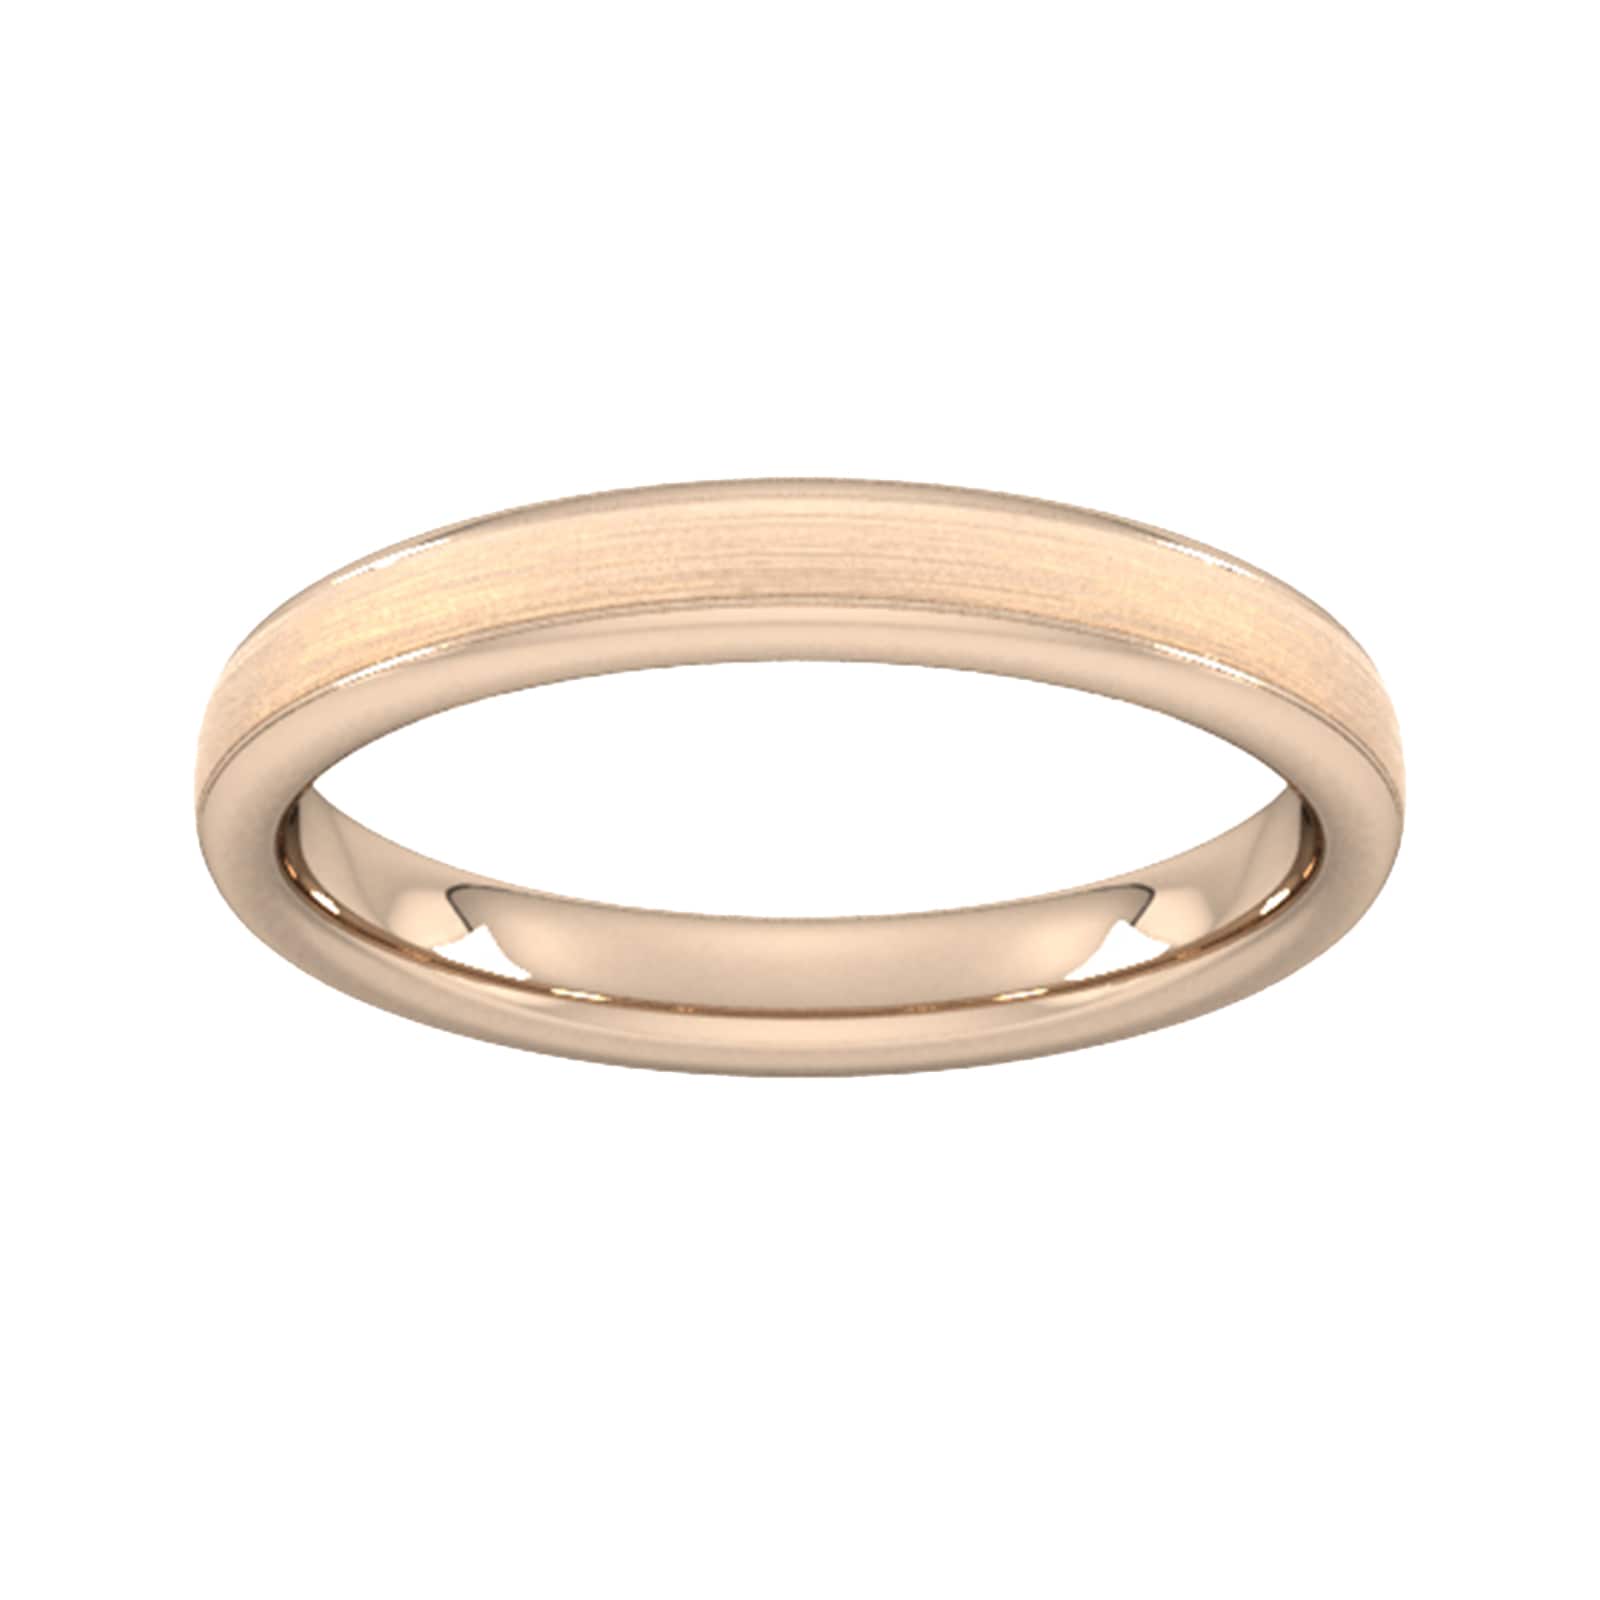 3mm Slight Court Extra Heavy Matt Centre With Grooves Wedding Ring In 18 Carat Rose Gold - Ring Size J